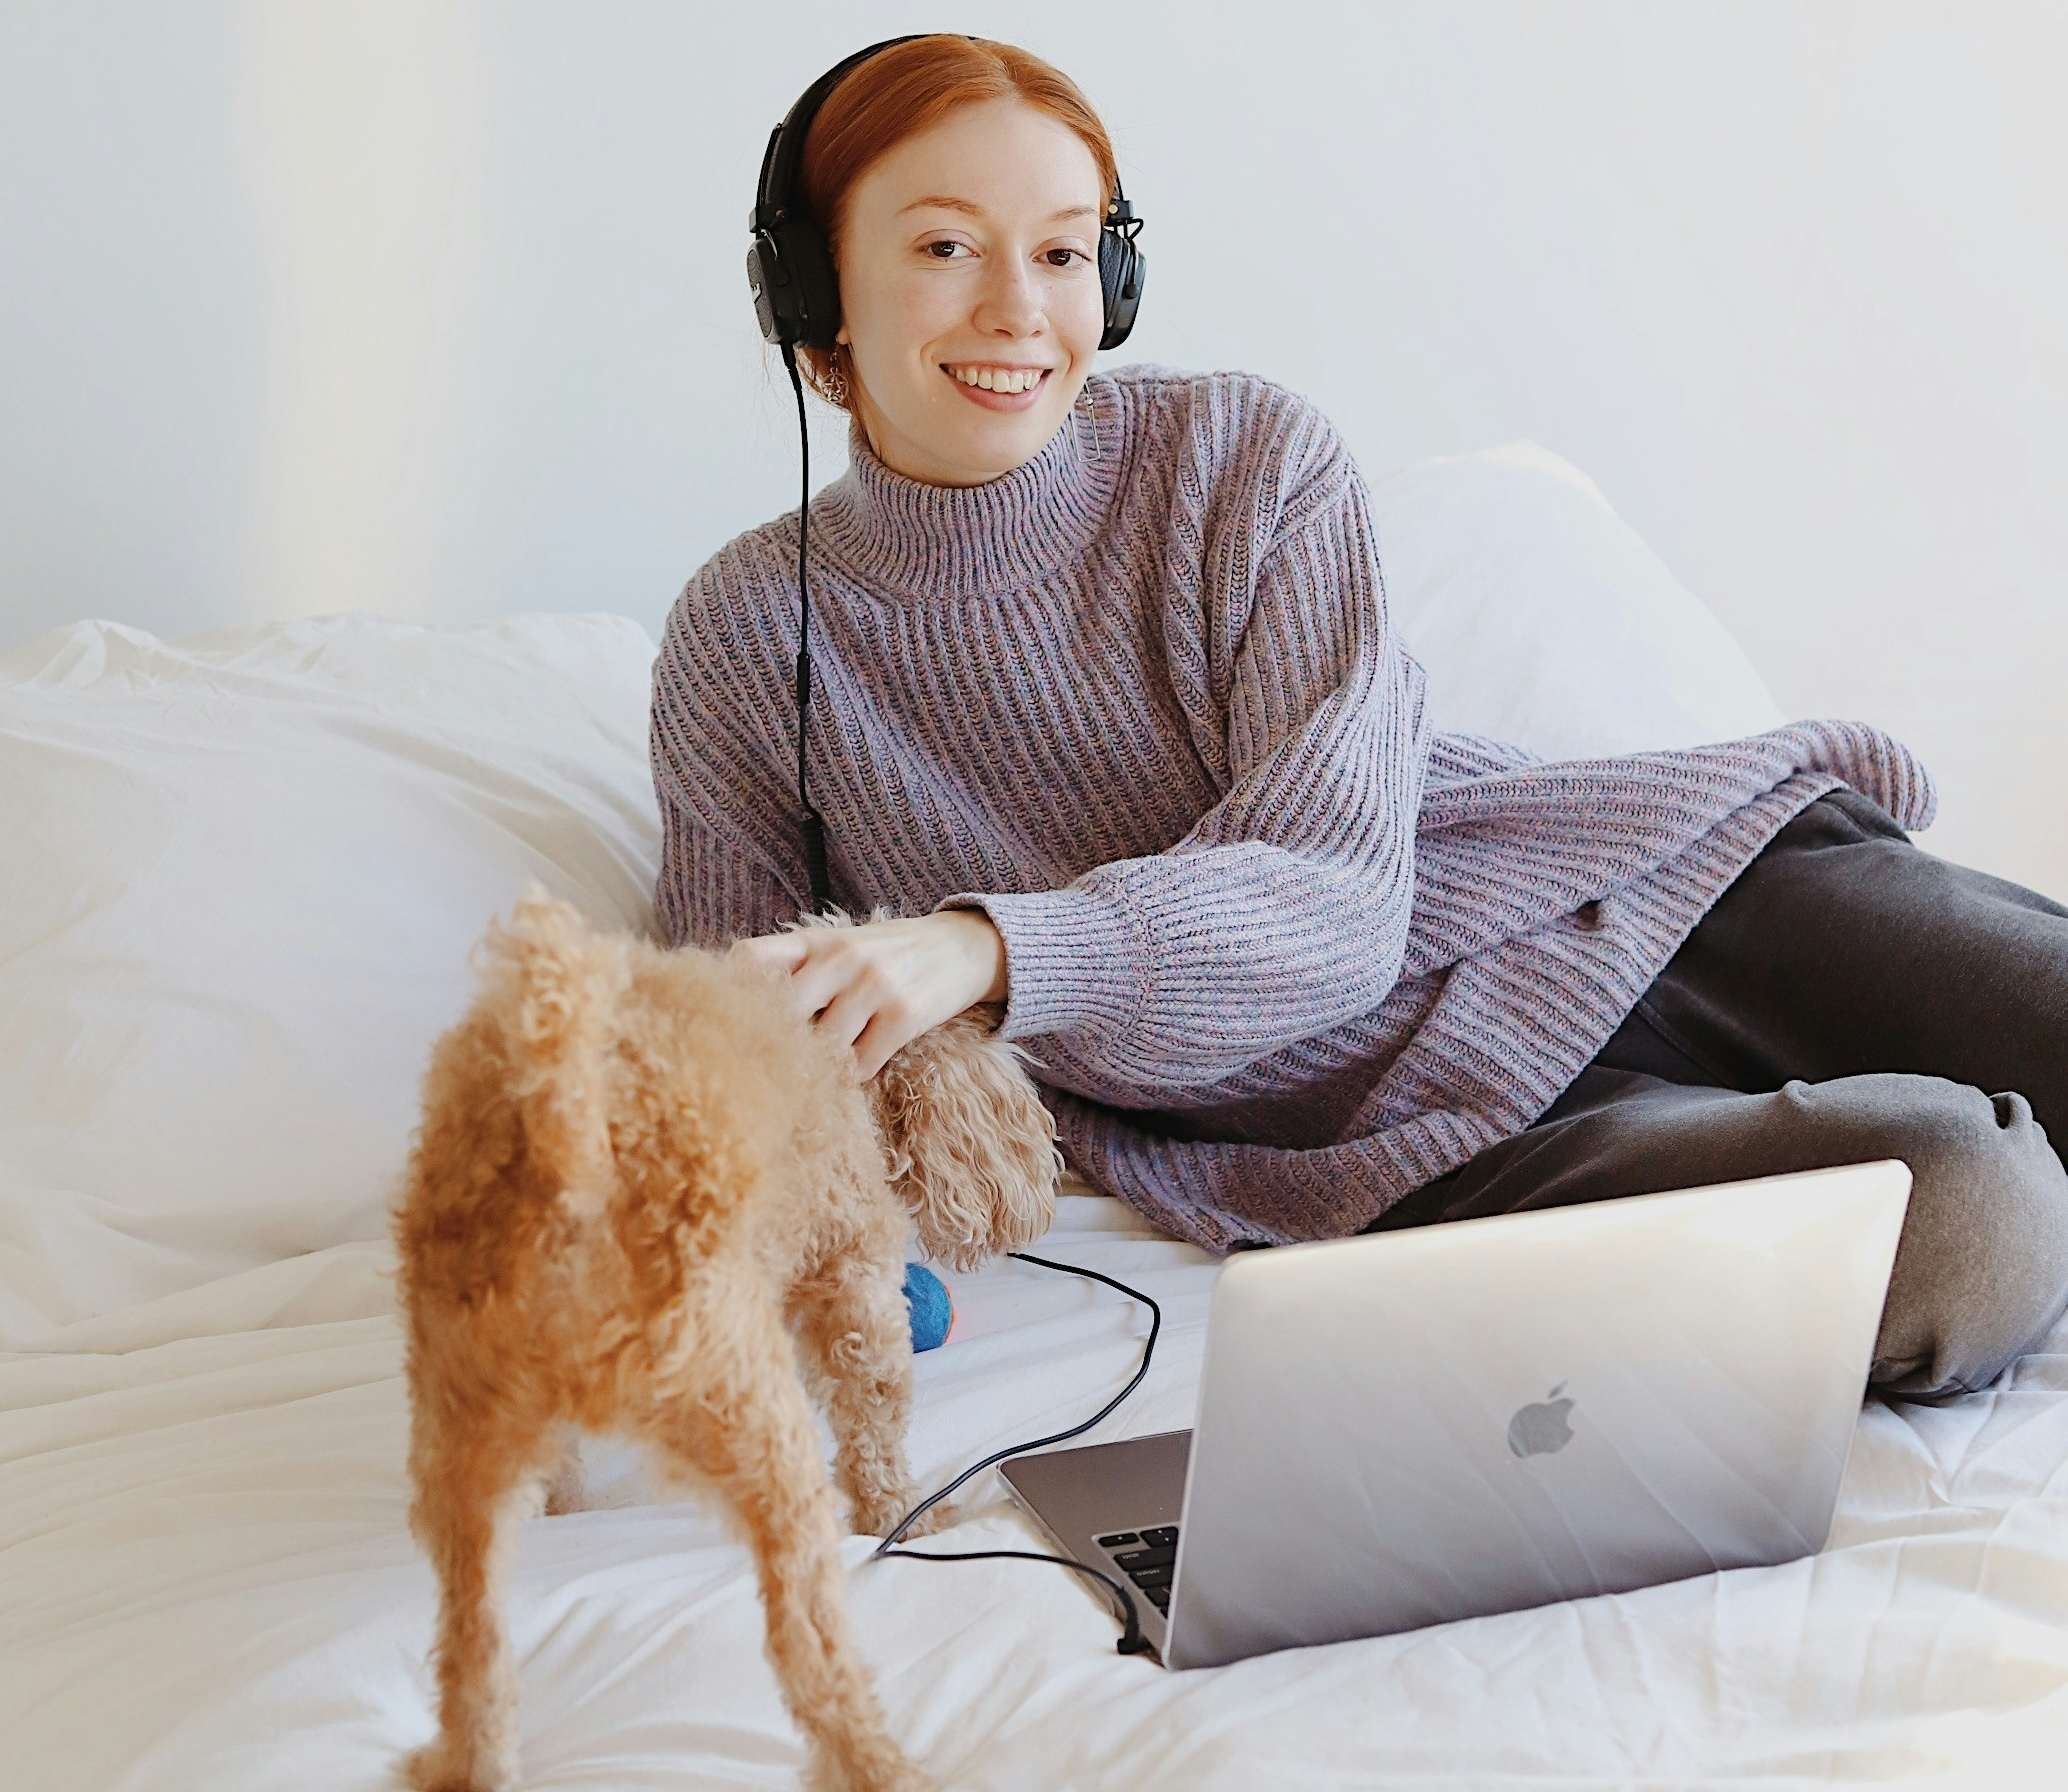 Woman on bed petting dog with computer in front of her